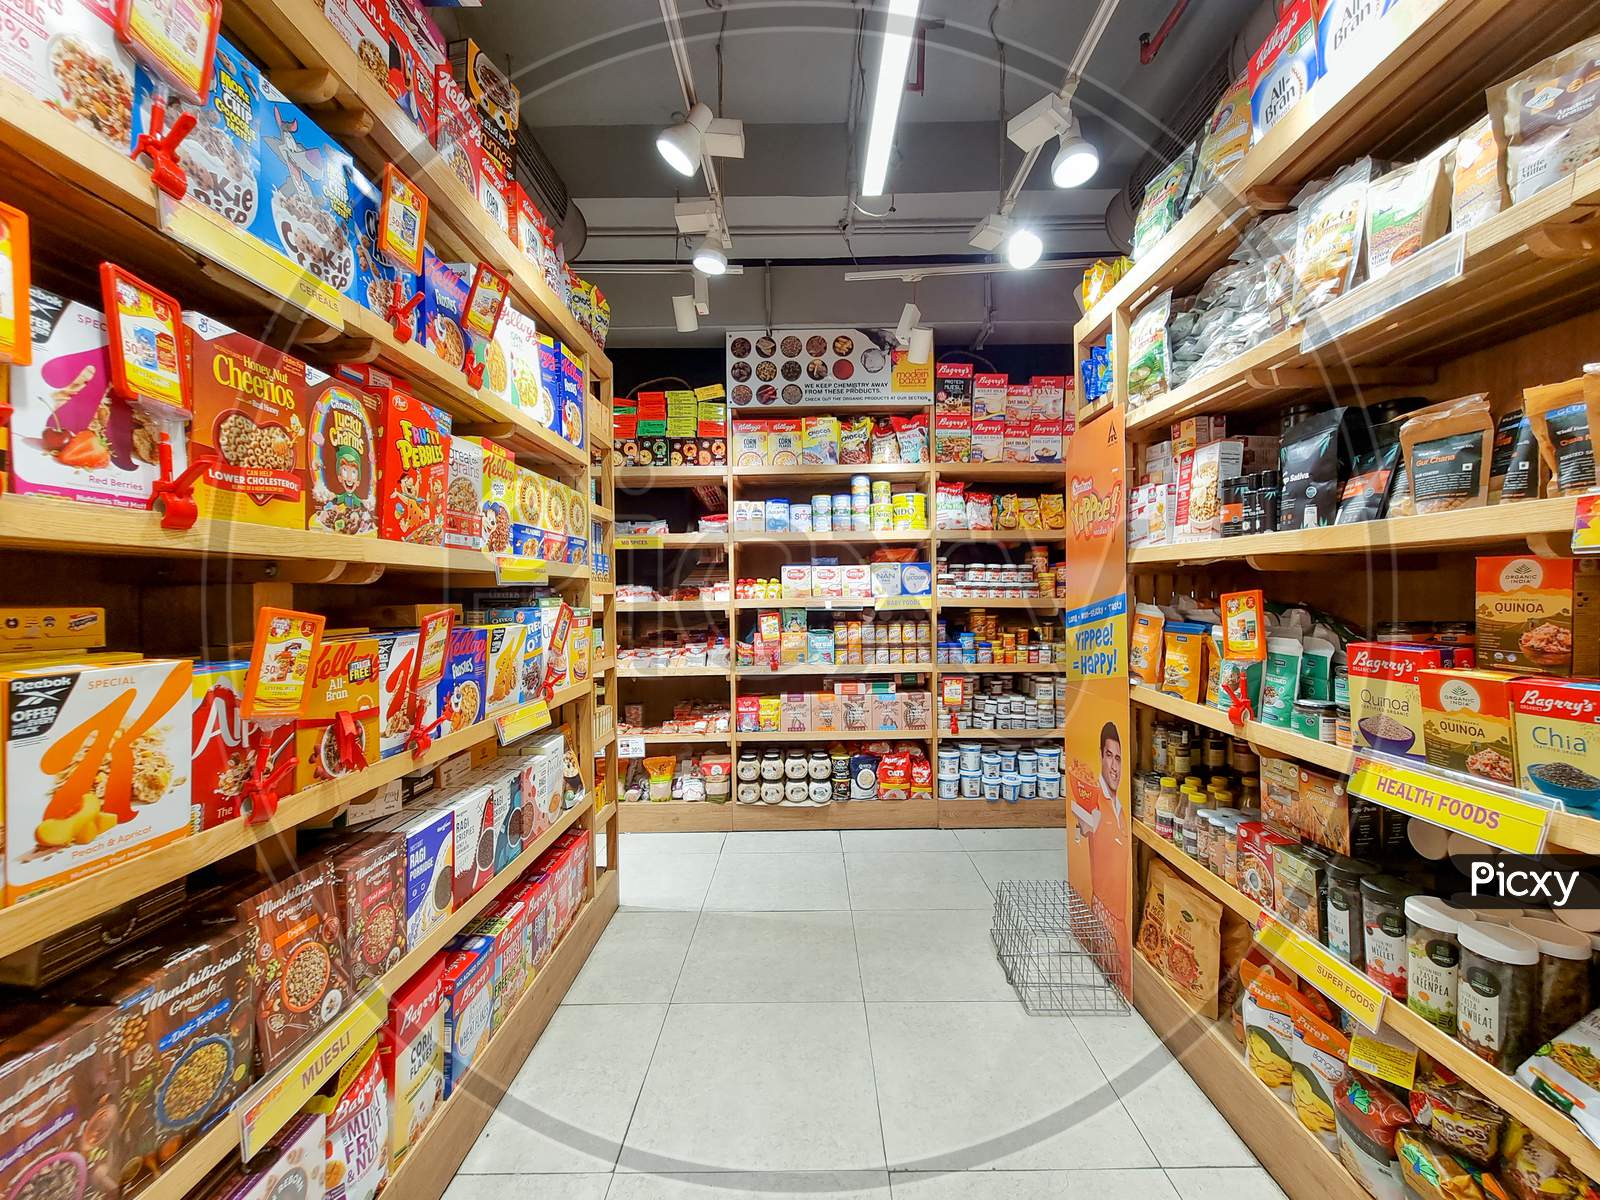 Fmcg Products On Shelf With Colorful Packaging Showing Easy To Make And Eat Products Health Foods And More Made By Companies Like Unilever, Nestle, Kellogs And More